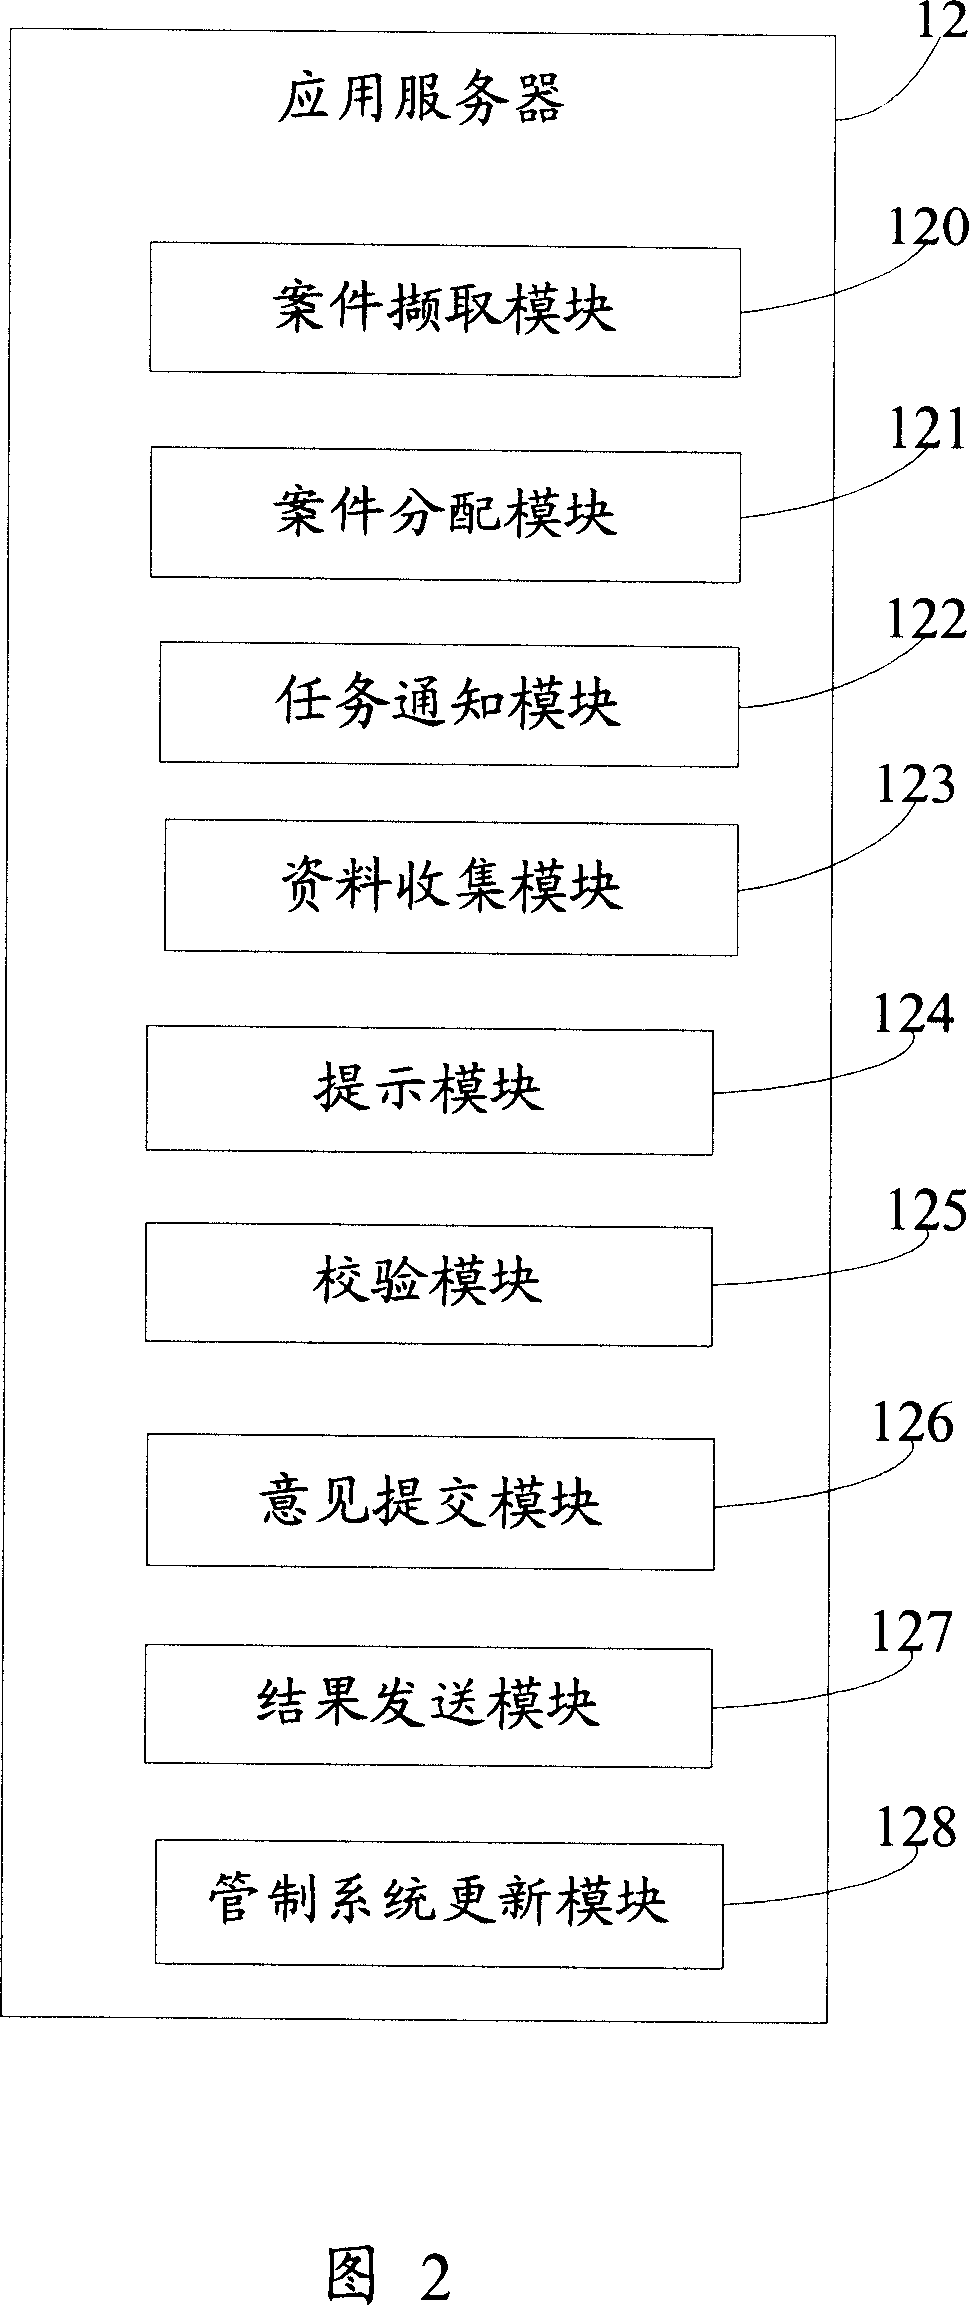 Patent valve estimating system and method